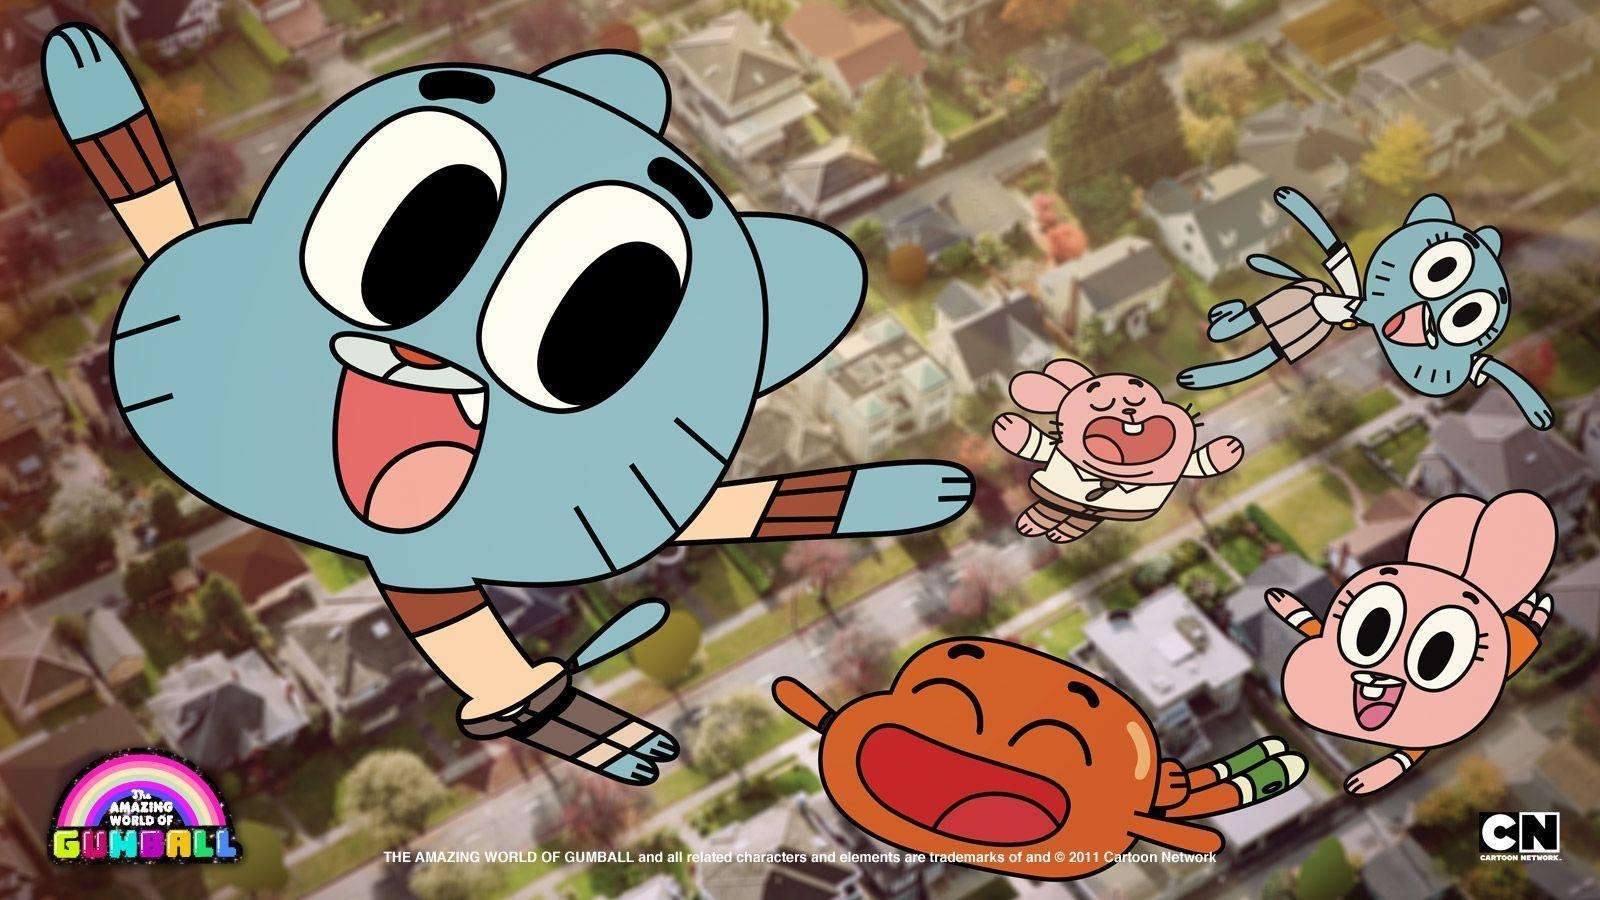 the amazing world of gumball wallpapers - wallpaper cave